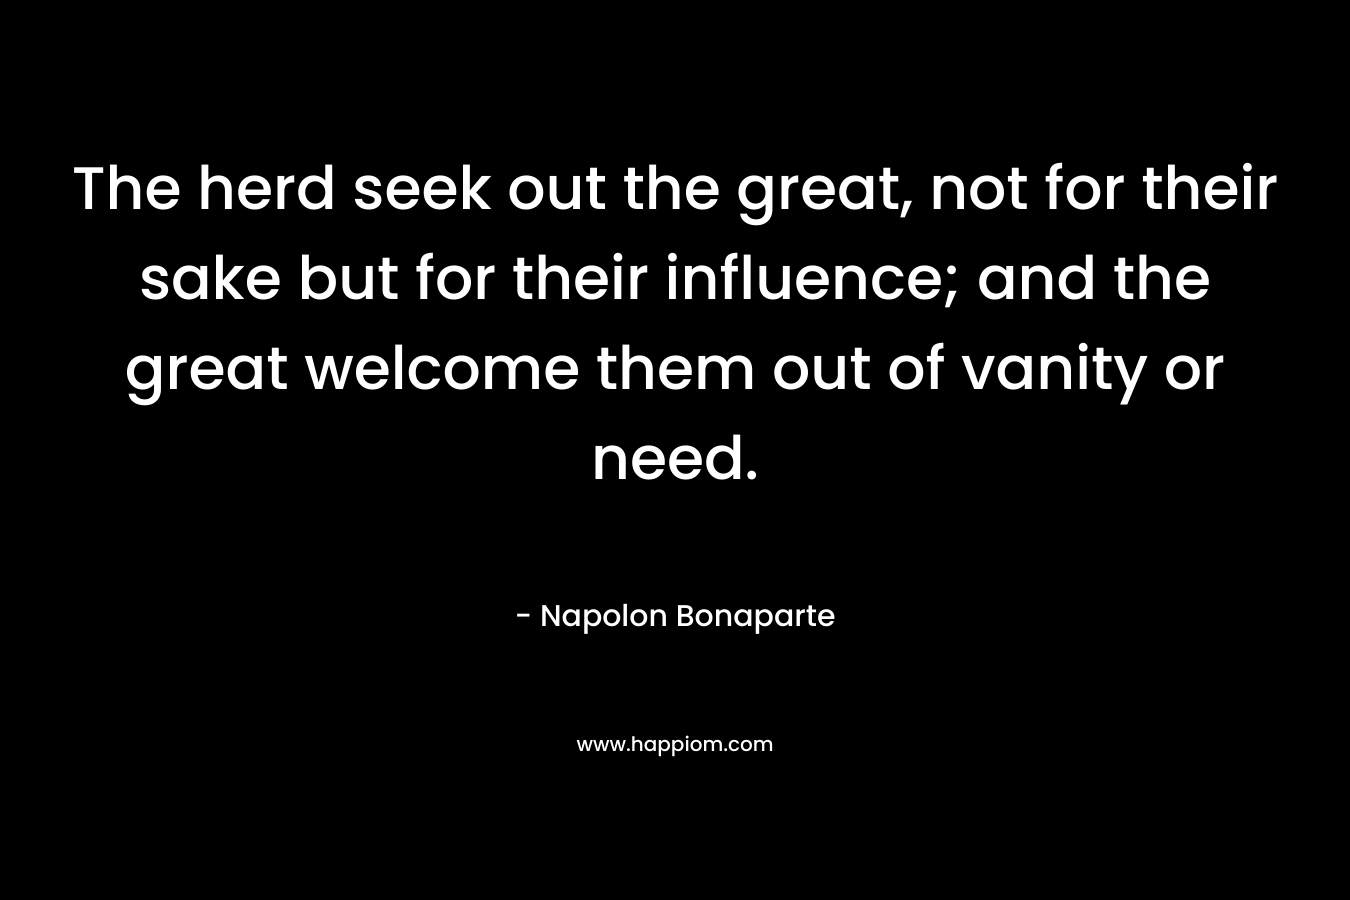 The herd seek out the great, not for their sake but for their influence; and the great welcome them out of vanity or need. – Napolon Bonaparte